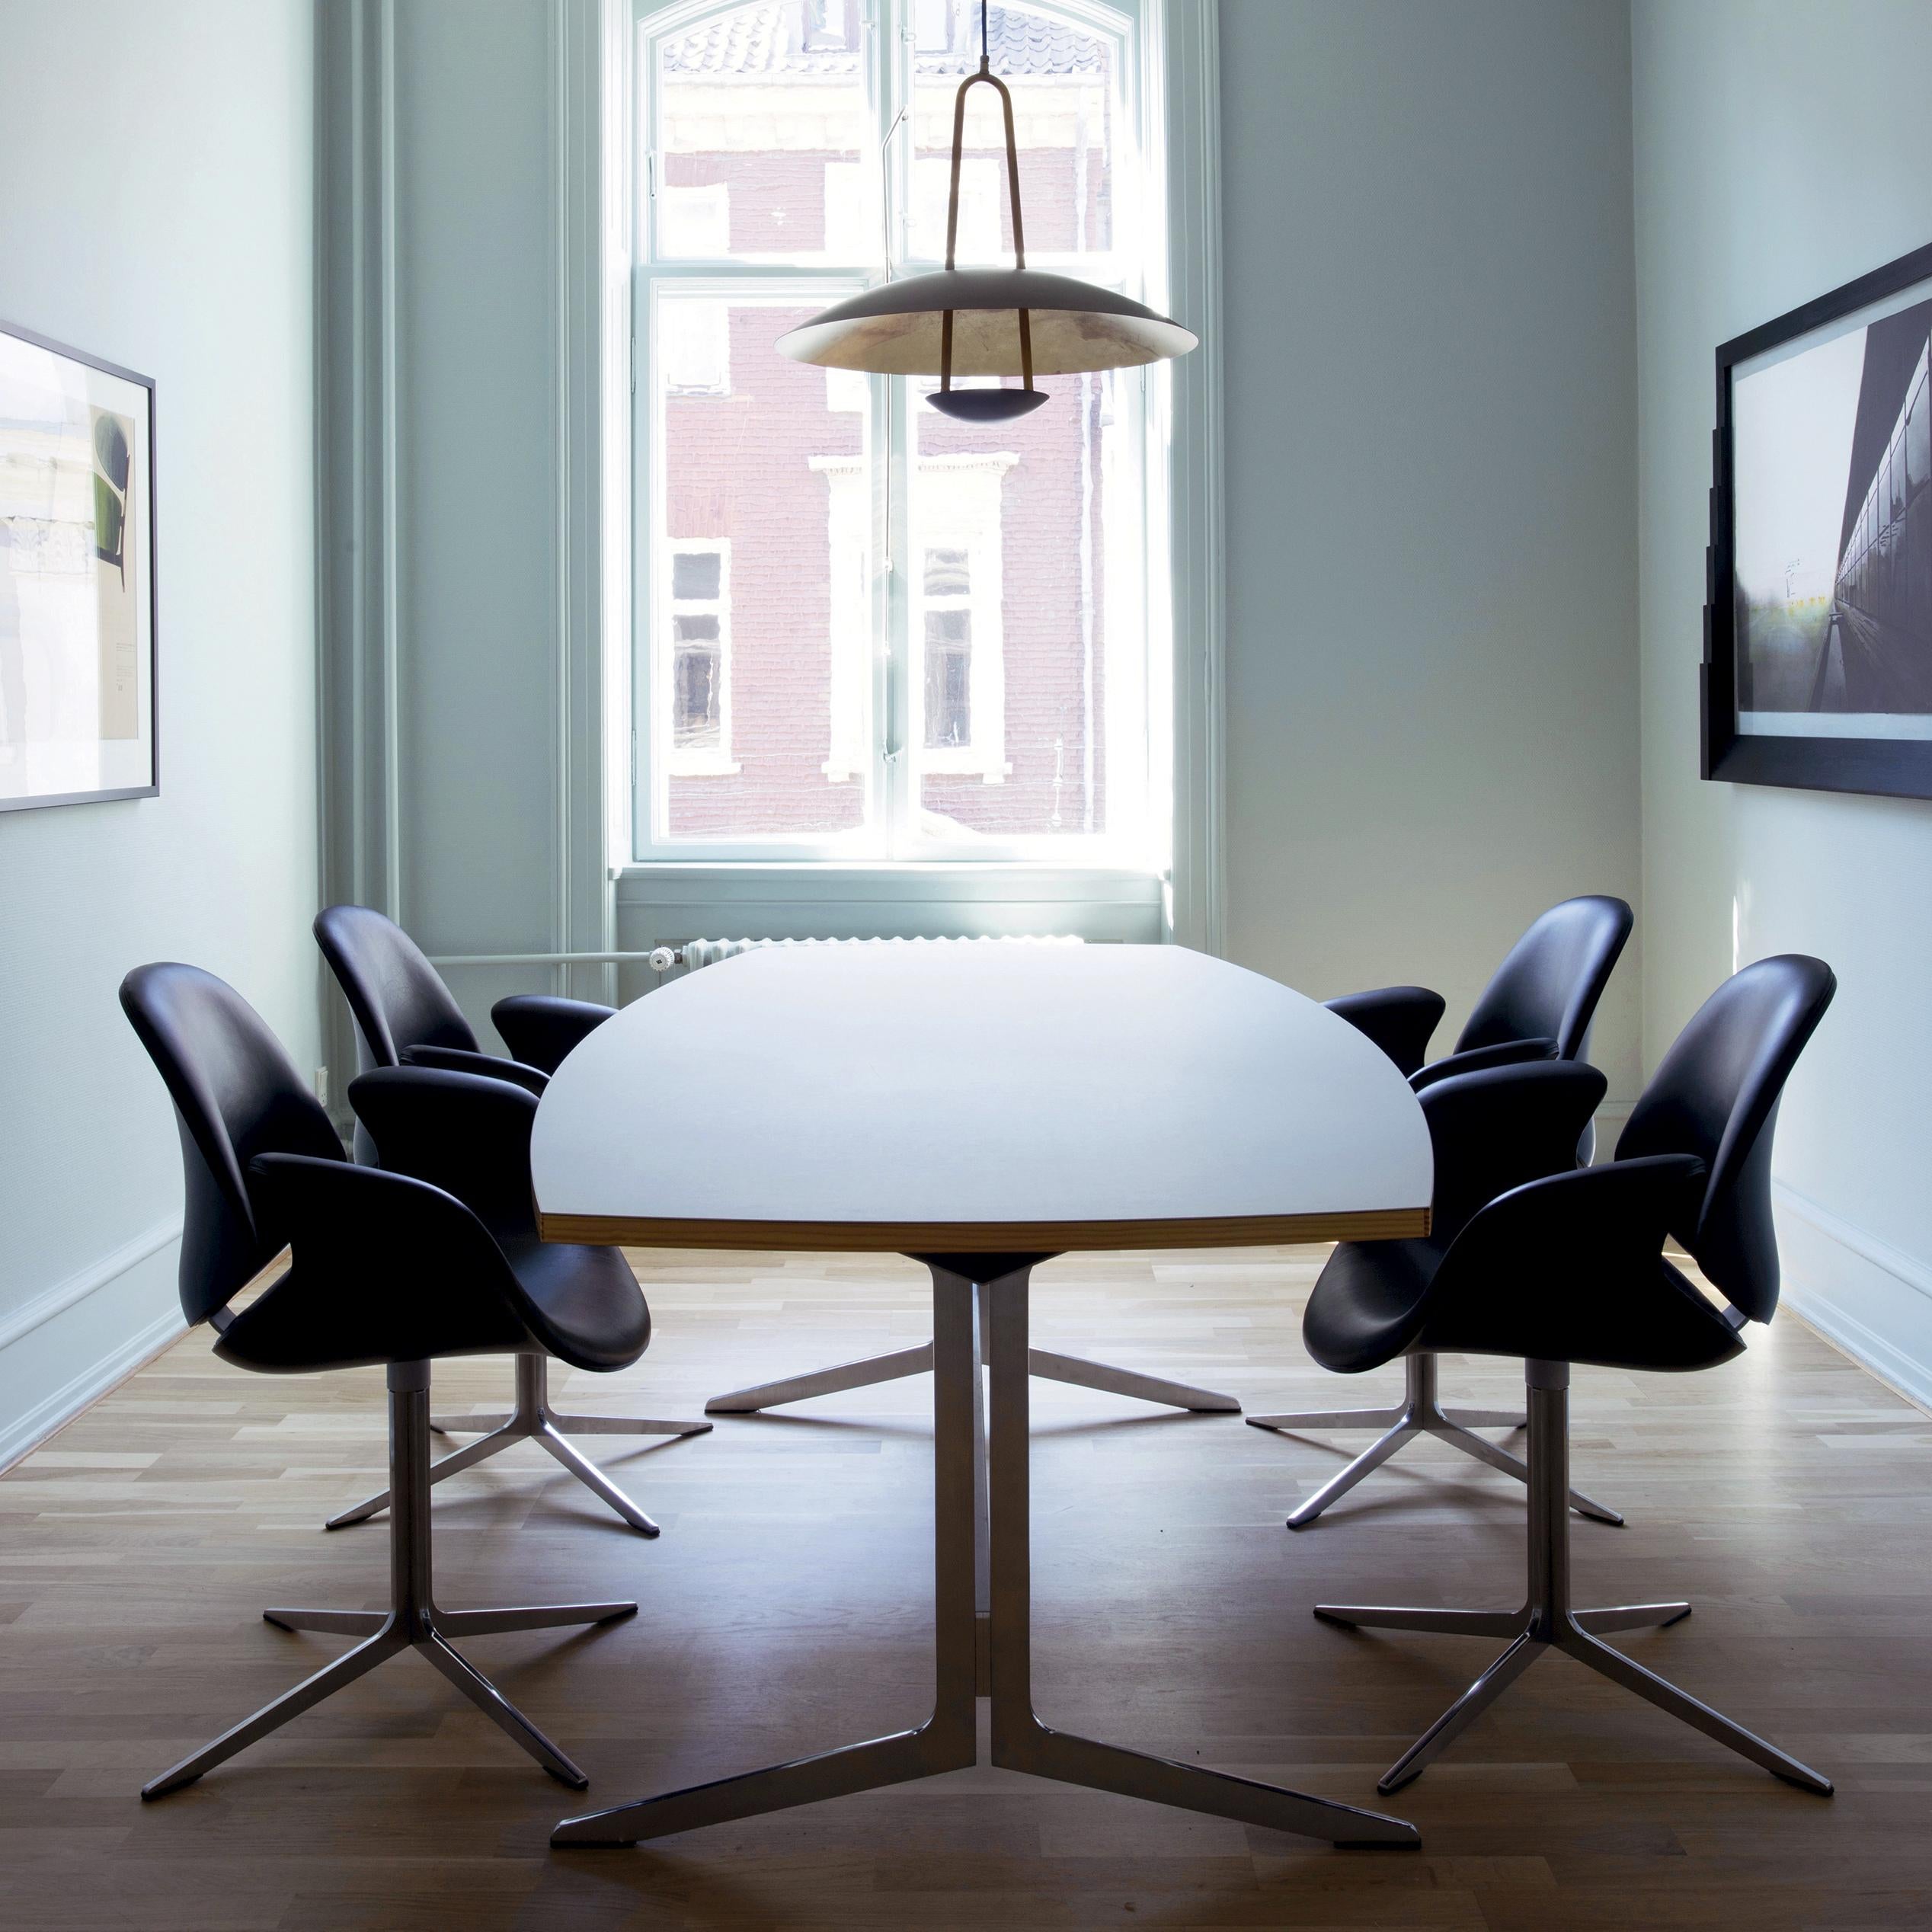 Steel Salto and Thomas Sigsgaard, KT 8324 Council Table by One Collection For Sale